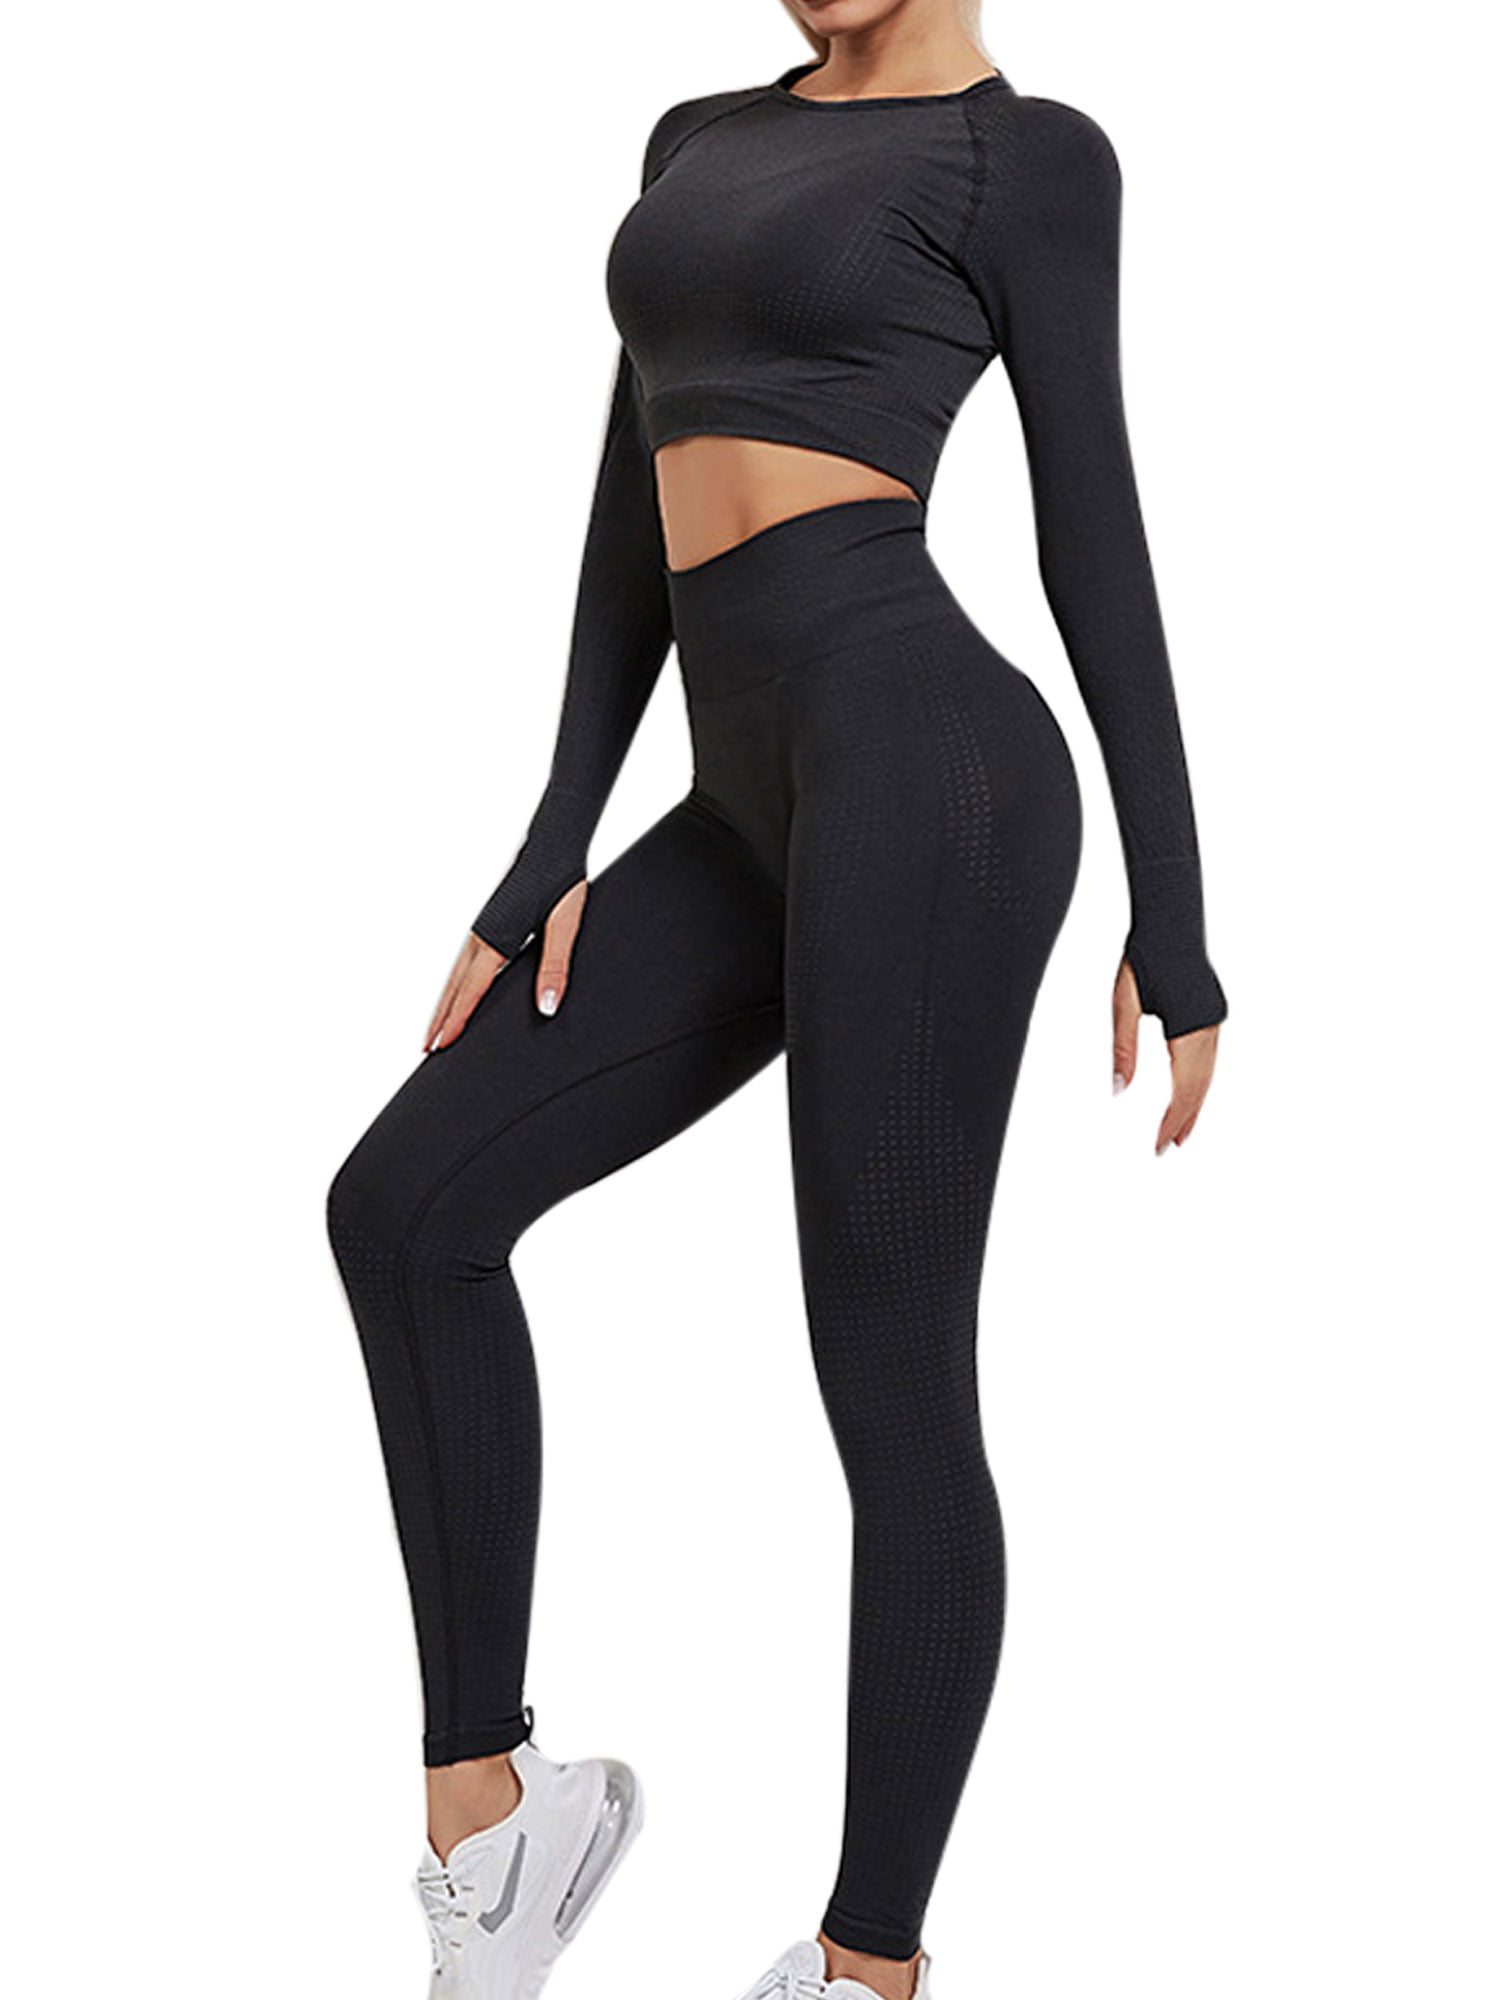 Long Sleeve Gym Crop Tops High Waisted Compression Shorts HCKG Women's 2 Piece Yoga Outfits Workout Athletic Sets 